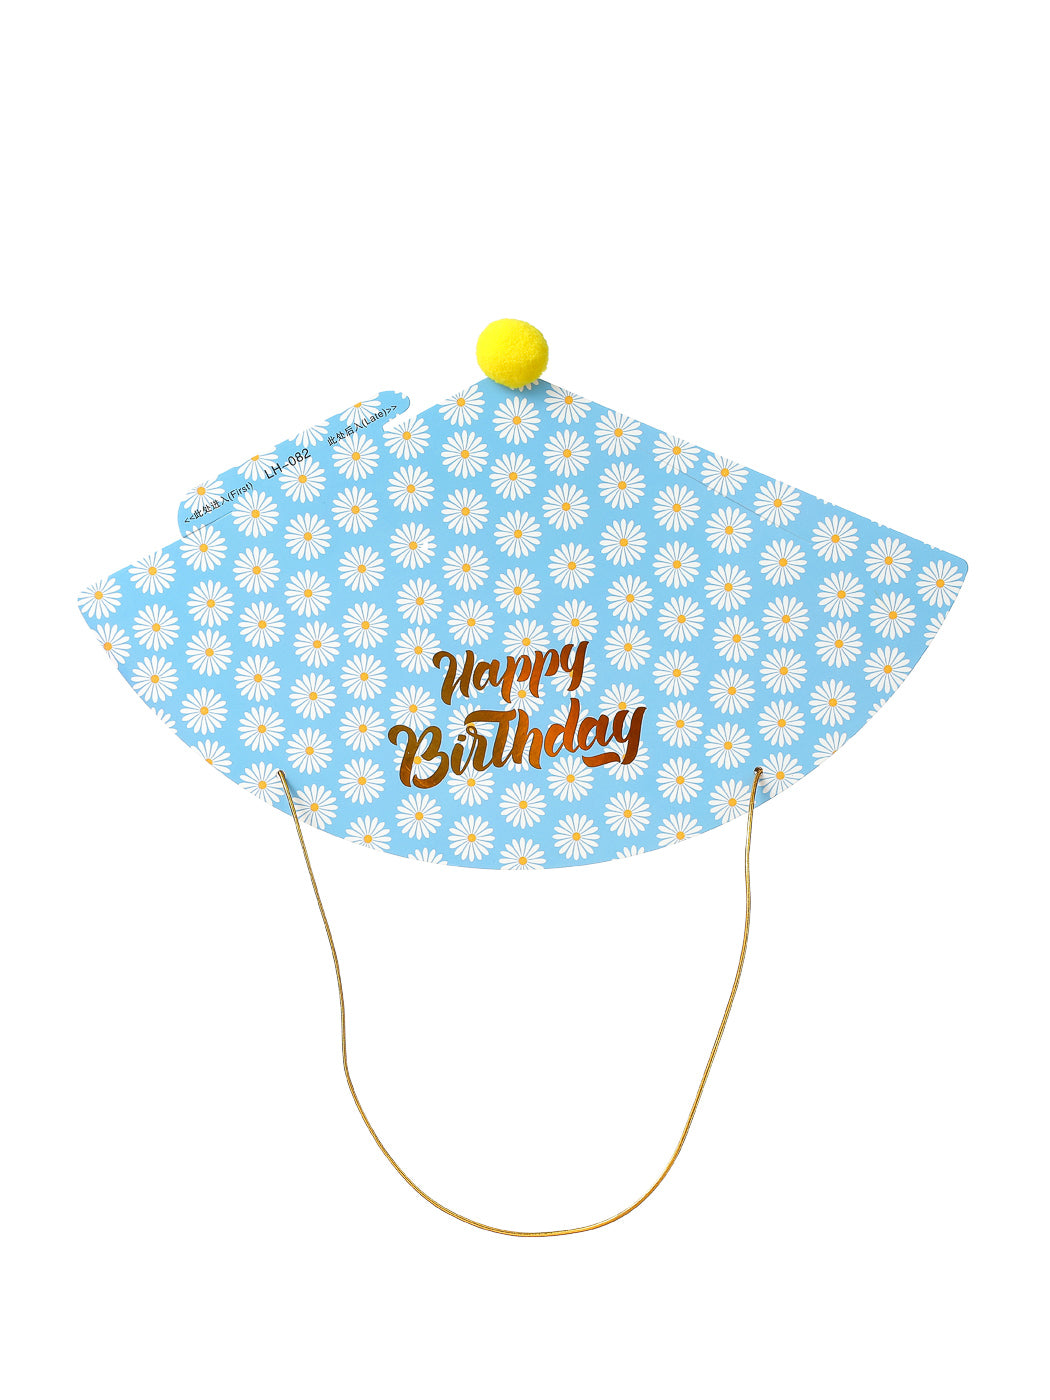 MINISO BIRTHDAY PARTY HAT(BLUE, DAISY) 2010879912104 PARTY DECORATIONS